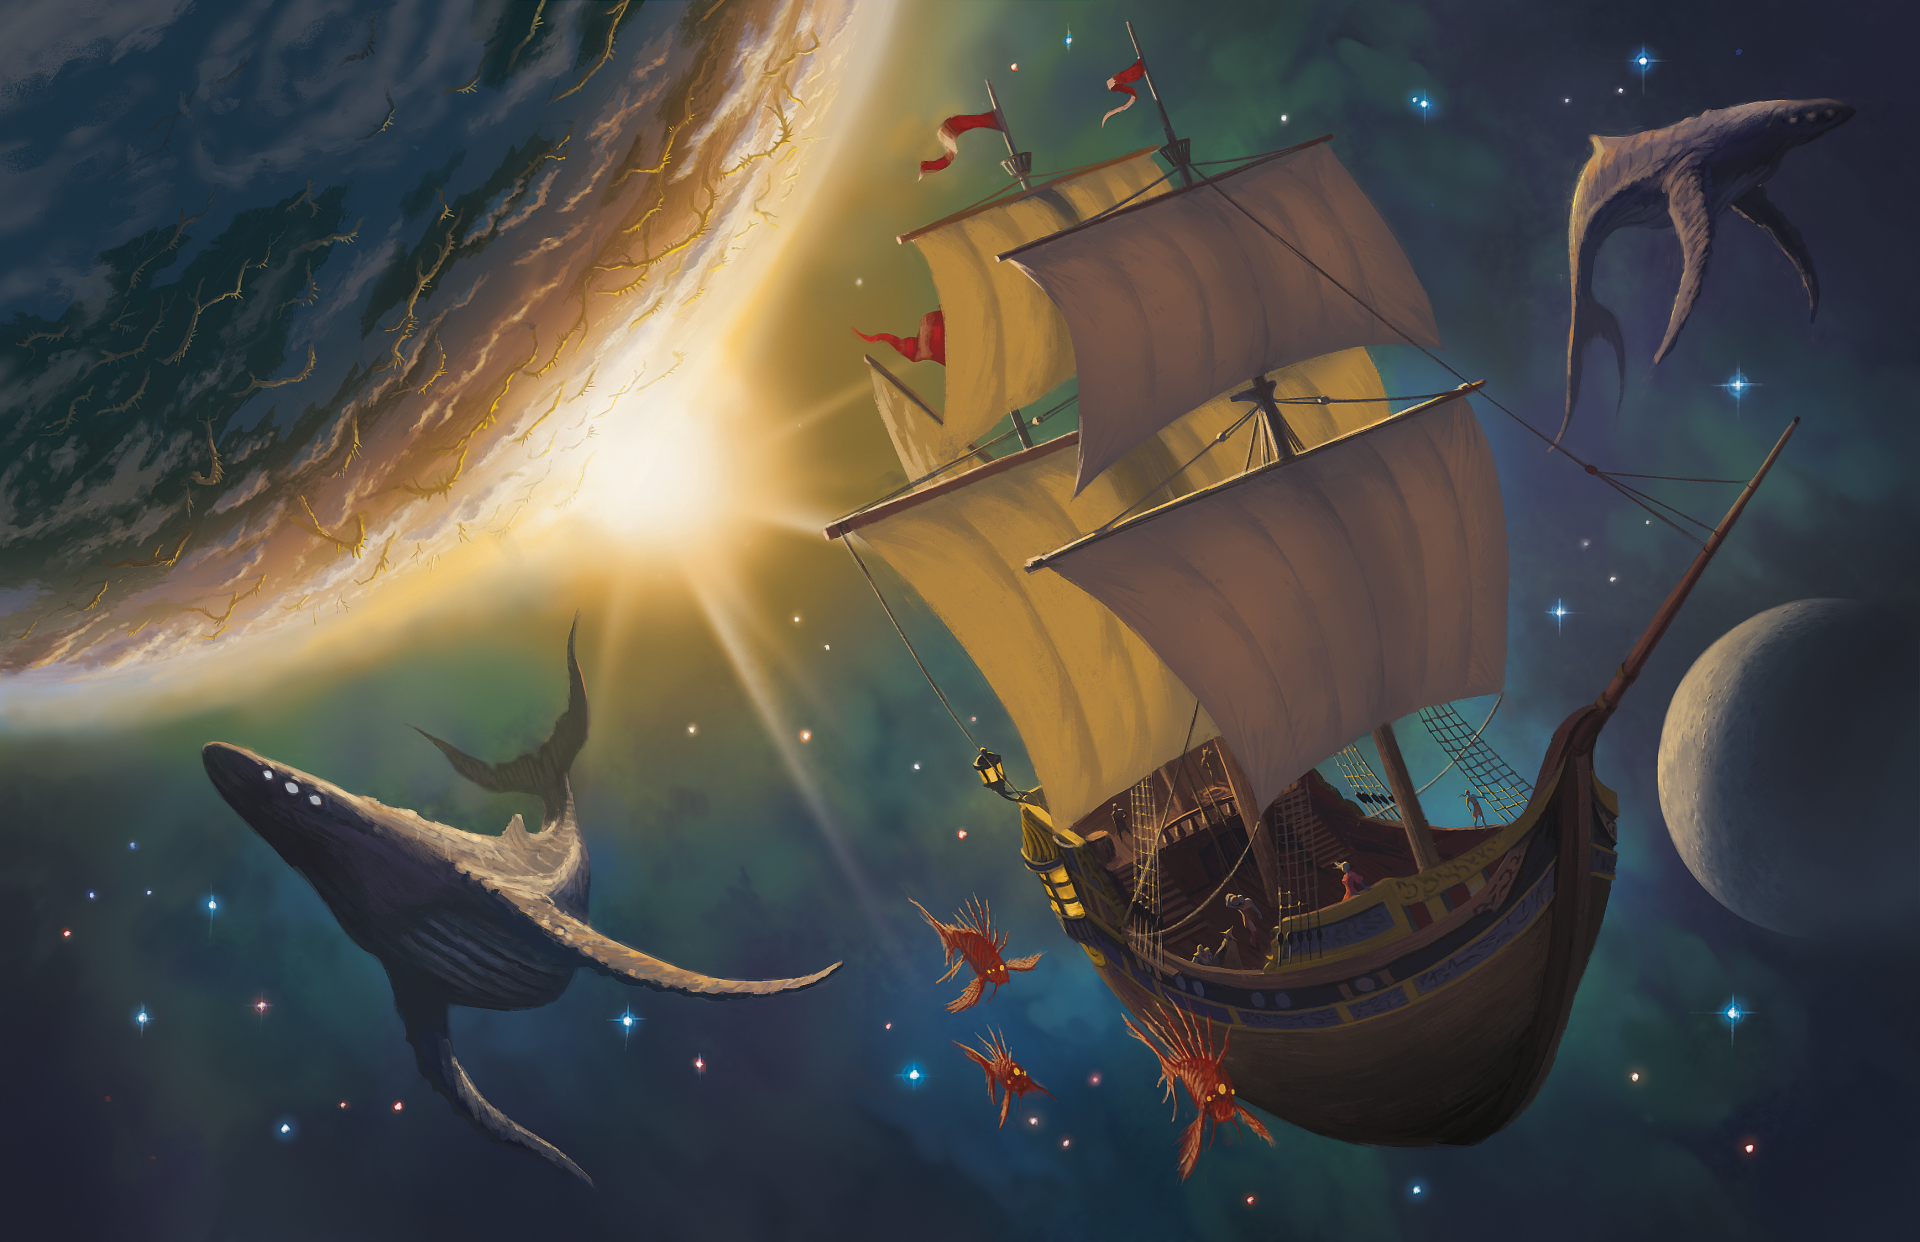 A pirate ship in space surrounded by whales from the new Dungeons & Dragons campaign Spelljammer: Adventure in Space